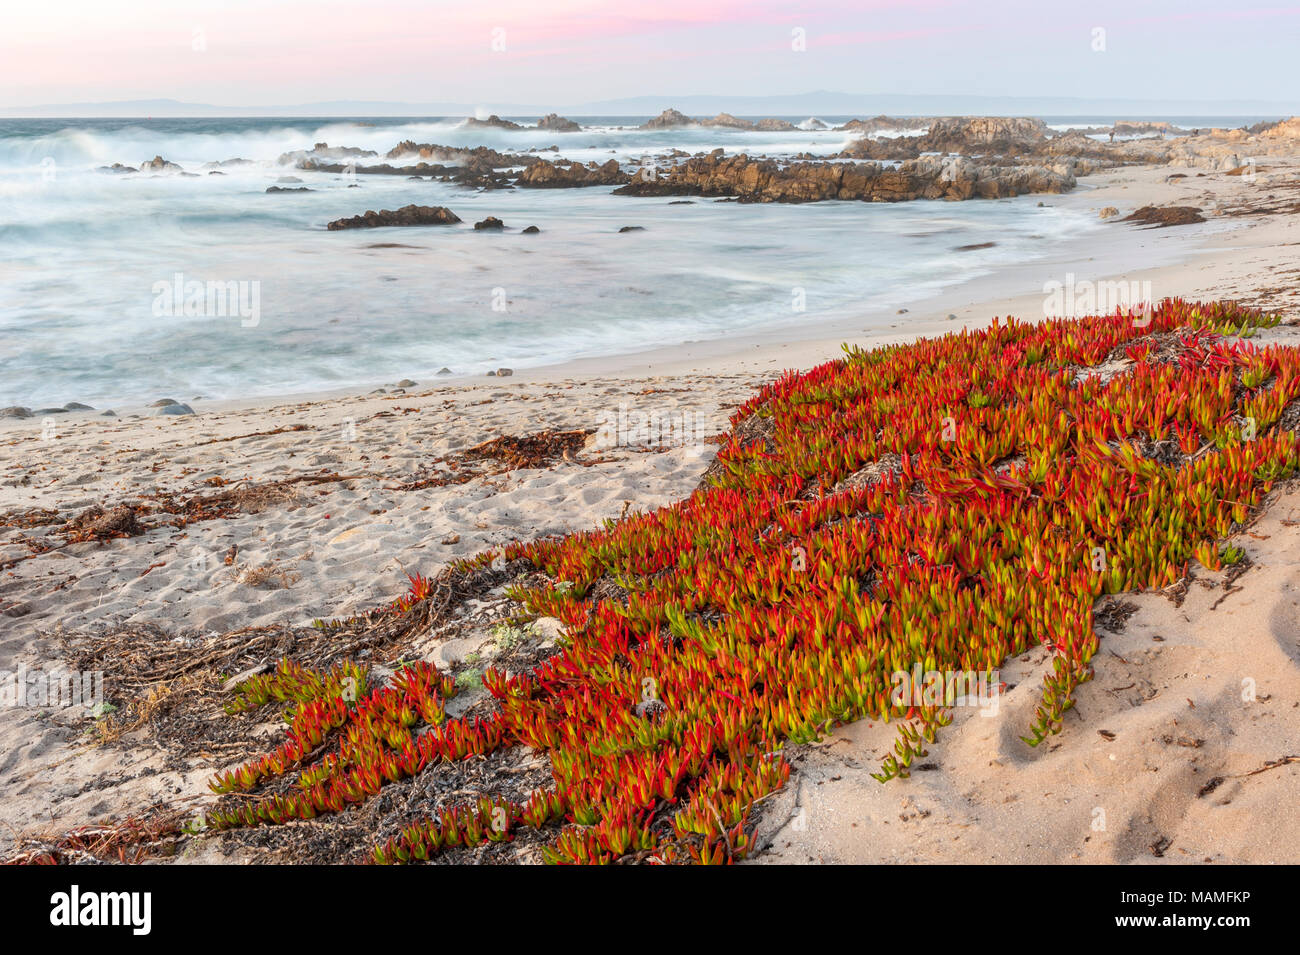 Atmospheric landscape highway ice plant (Carpobrotus edulis), Hottentot-fig, sour fig, covering beach sand at Pacific Grove, Coast of California, USA. Stock Photo